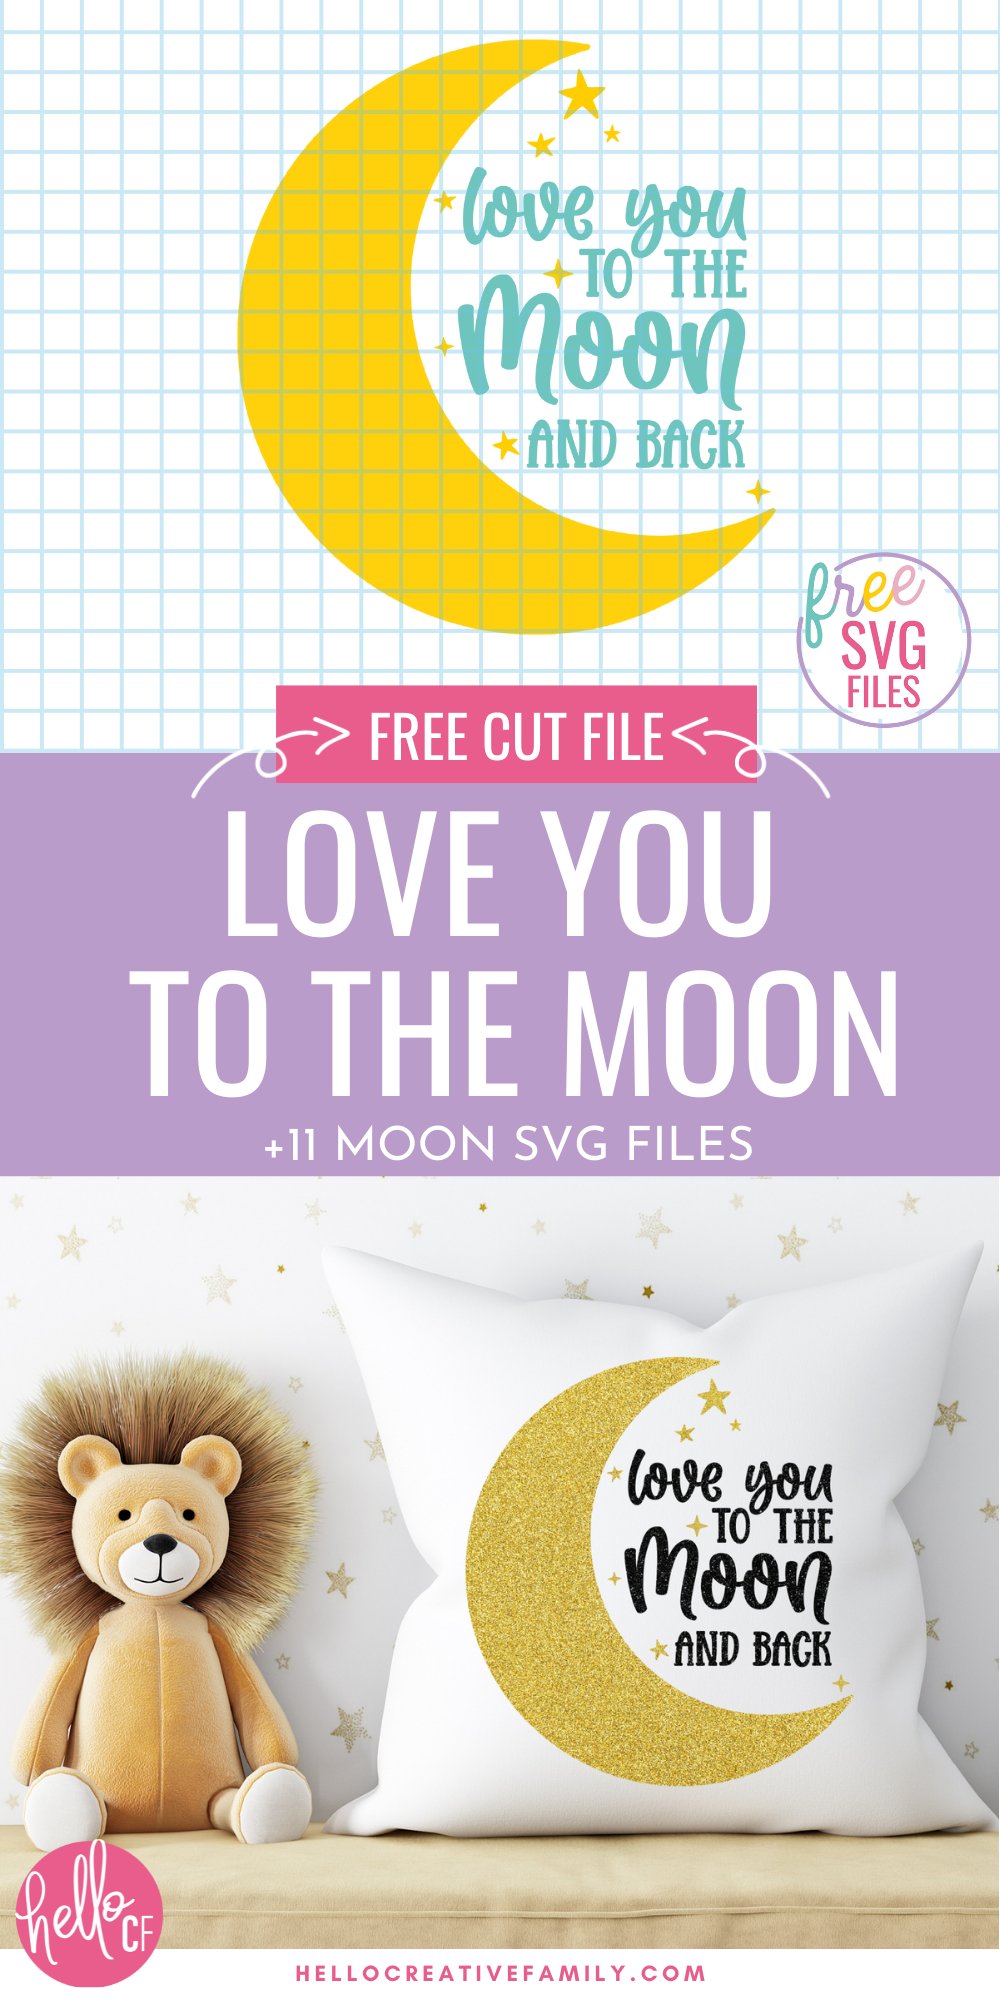 Need moon cut files for your crafty project? Get these 10 free moon SVG files including Love You To The Moon and Back.  These gorgeous SVGs are perfect for nursery decor, shirts, mugs, tote bags and so much more! Cut them with your Cricut Maker, Cricut Explore, Cricut Joy or Silhouette Cameo!